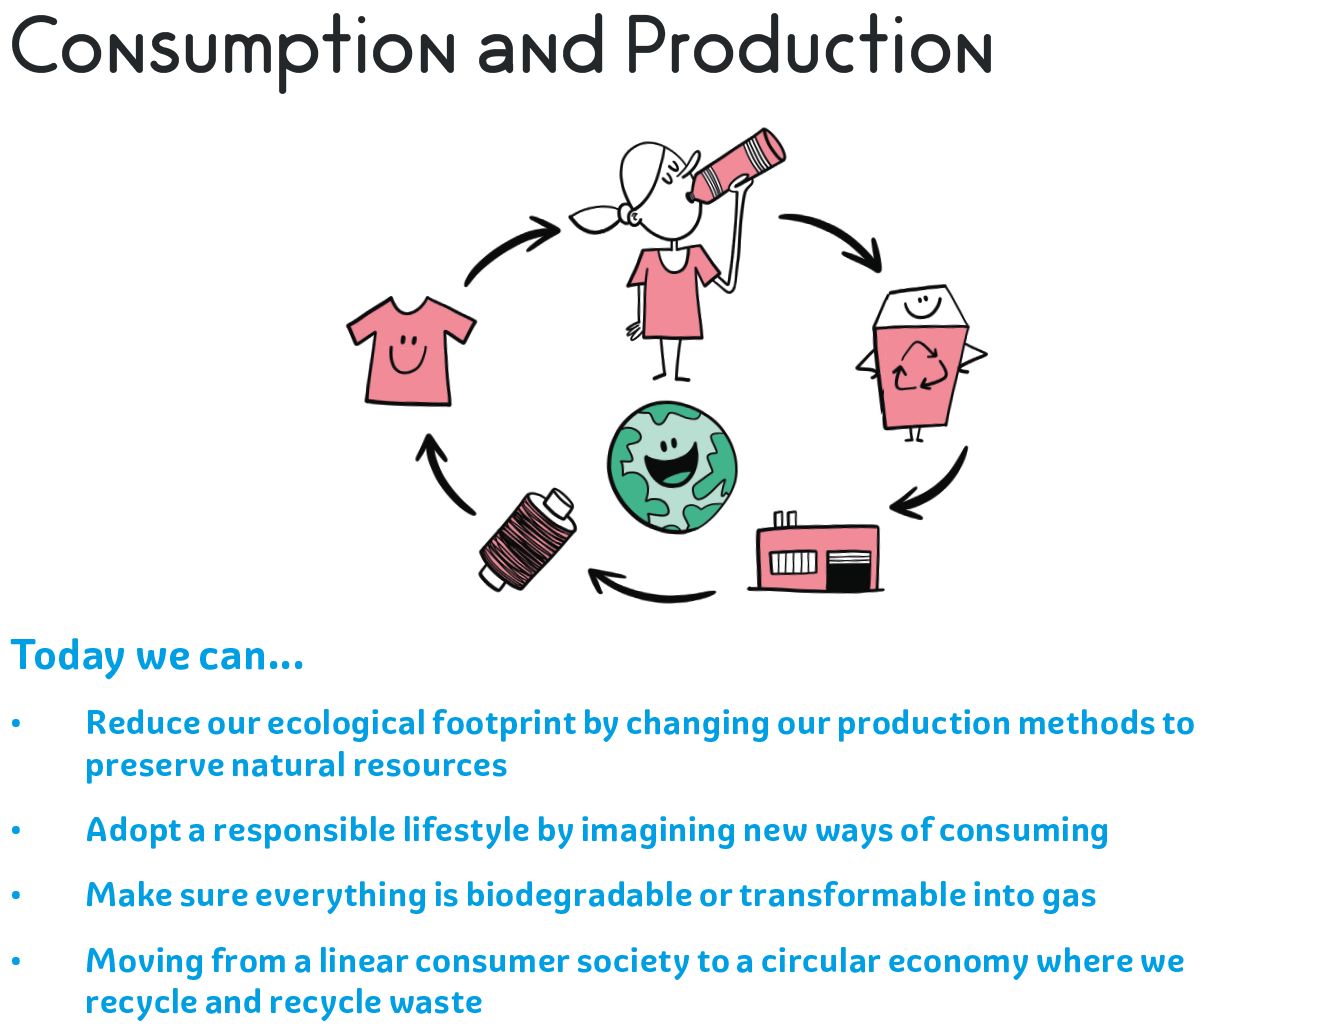 Consumption and production